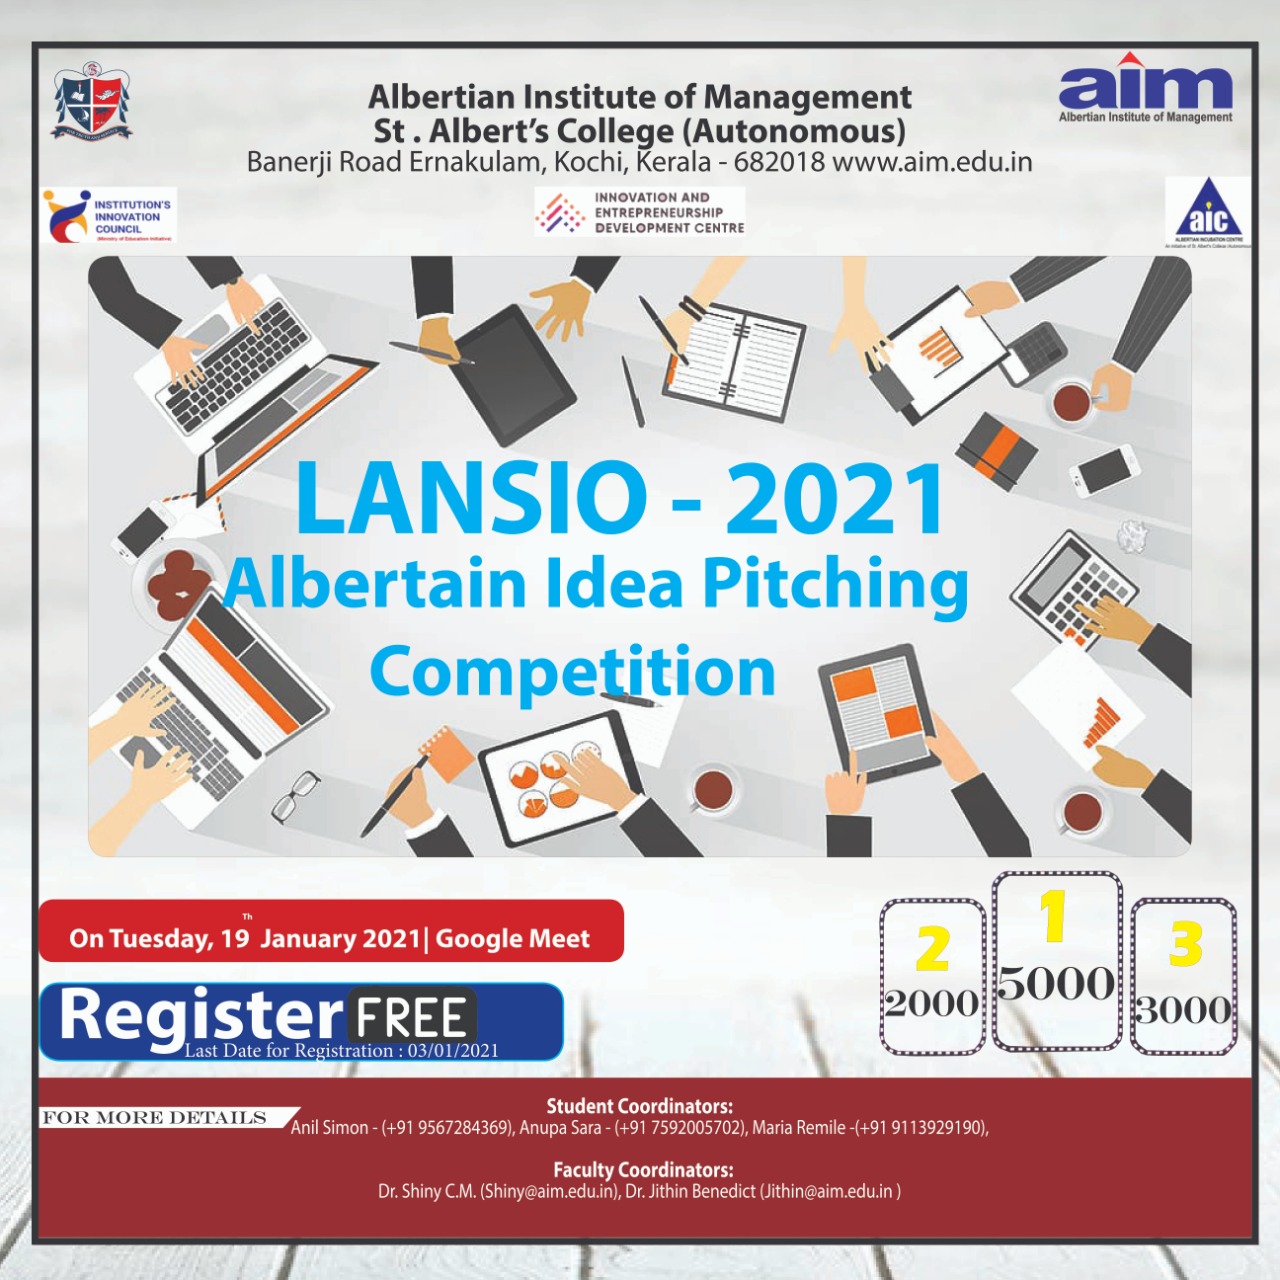 Lansio- 2021 Albertian Idea Pitching Competition